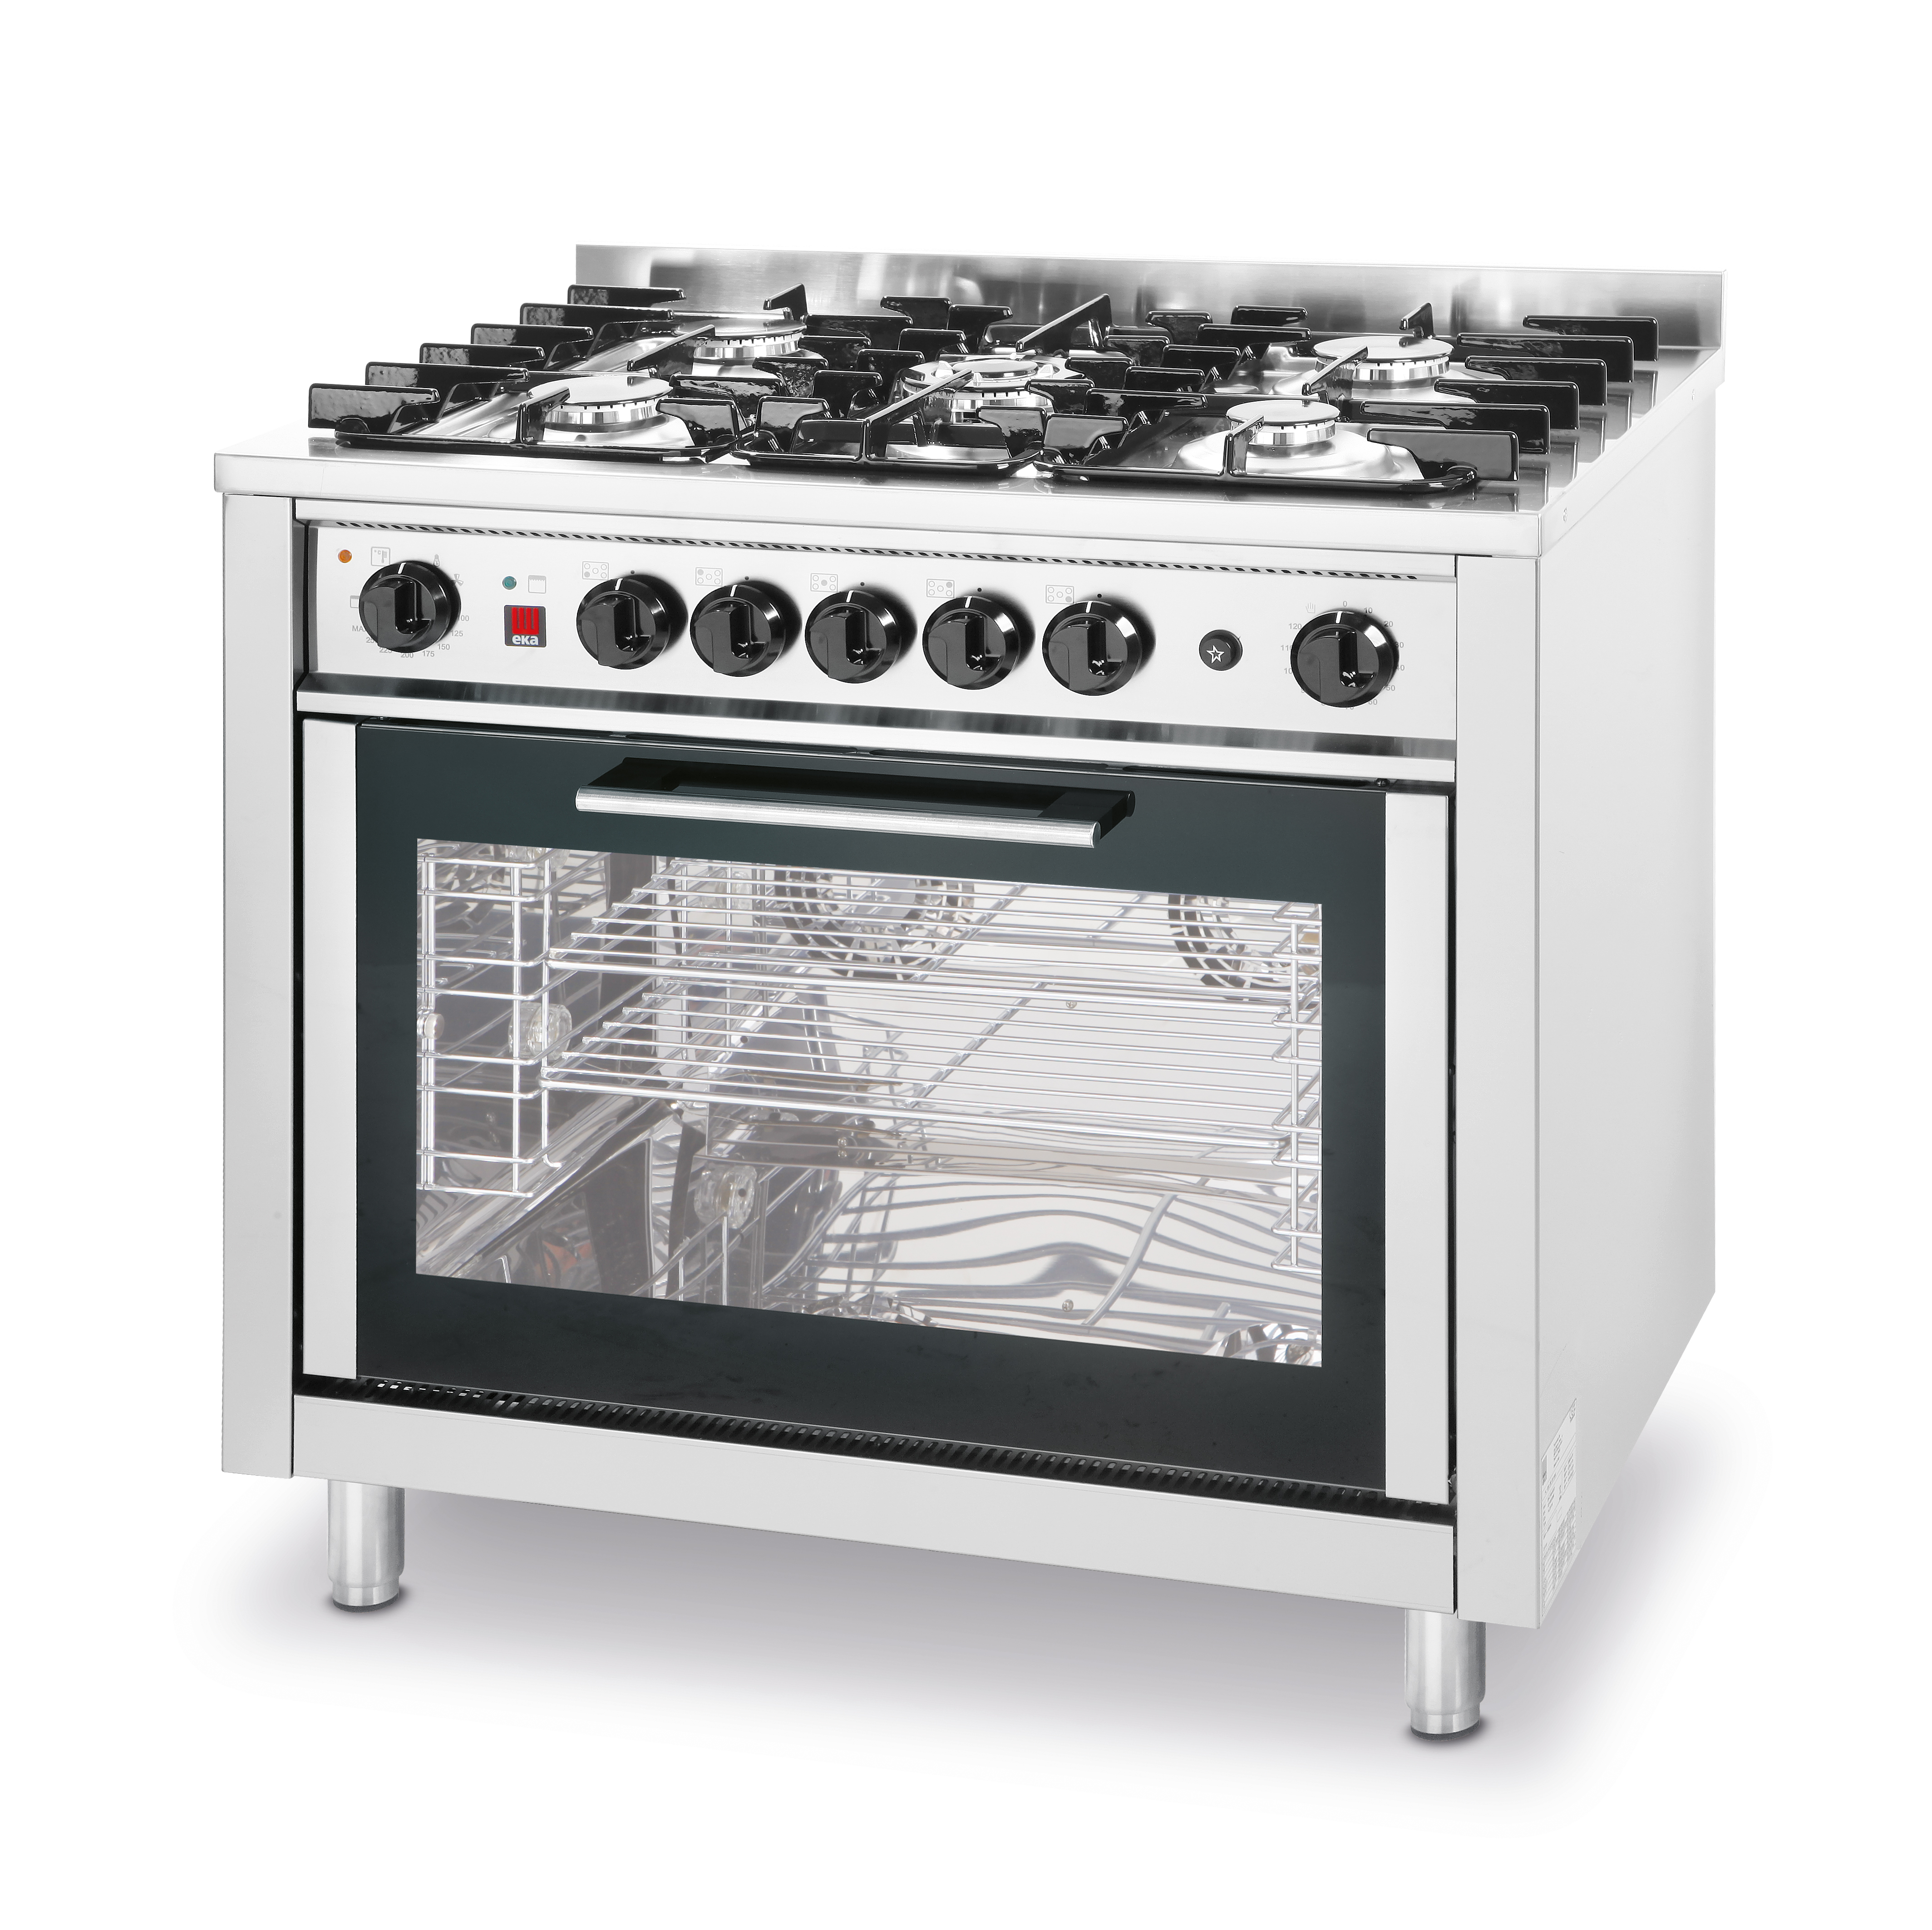 electric or gas oven which is better